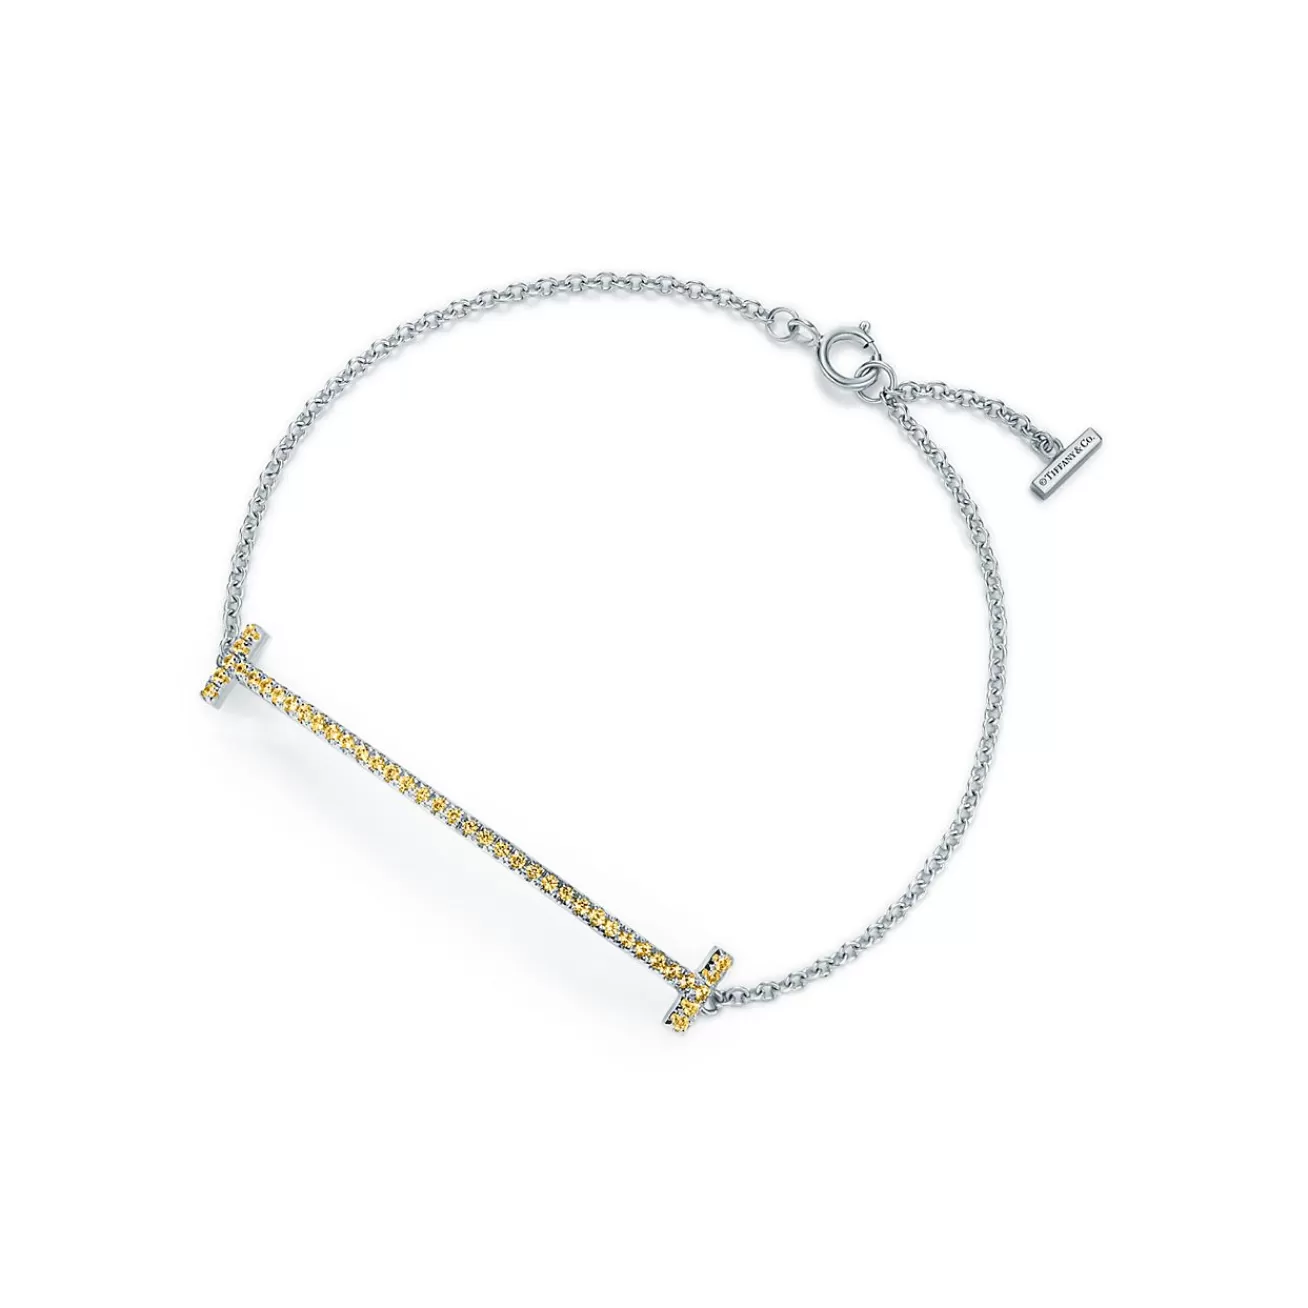 Tiffany & Co. Tiffany T Smile Chain Bracelet in White Gold with Yellow Sapphires | ^ Bracelets | Colored Gemstone Jewelry